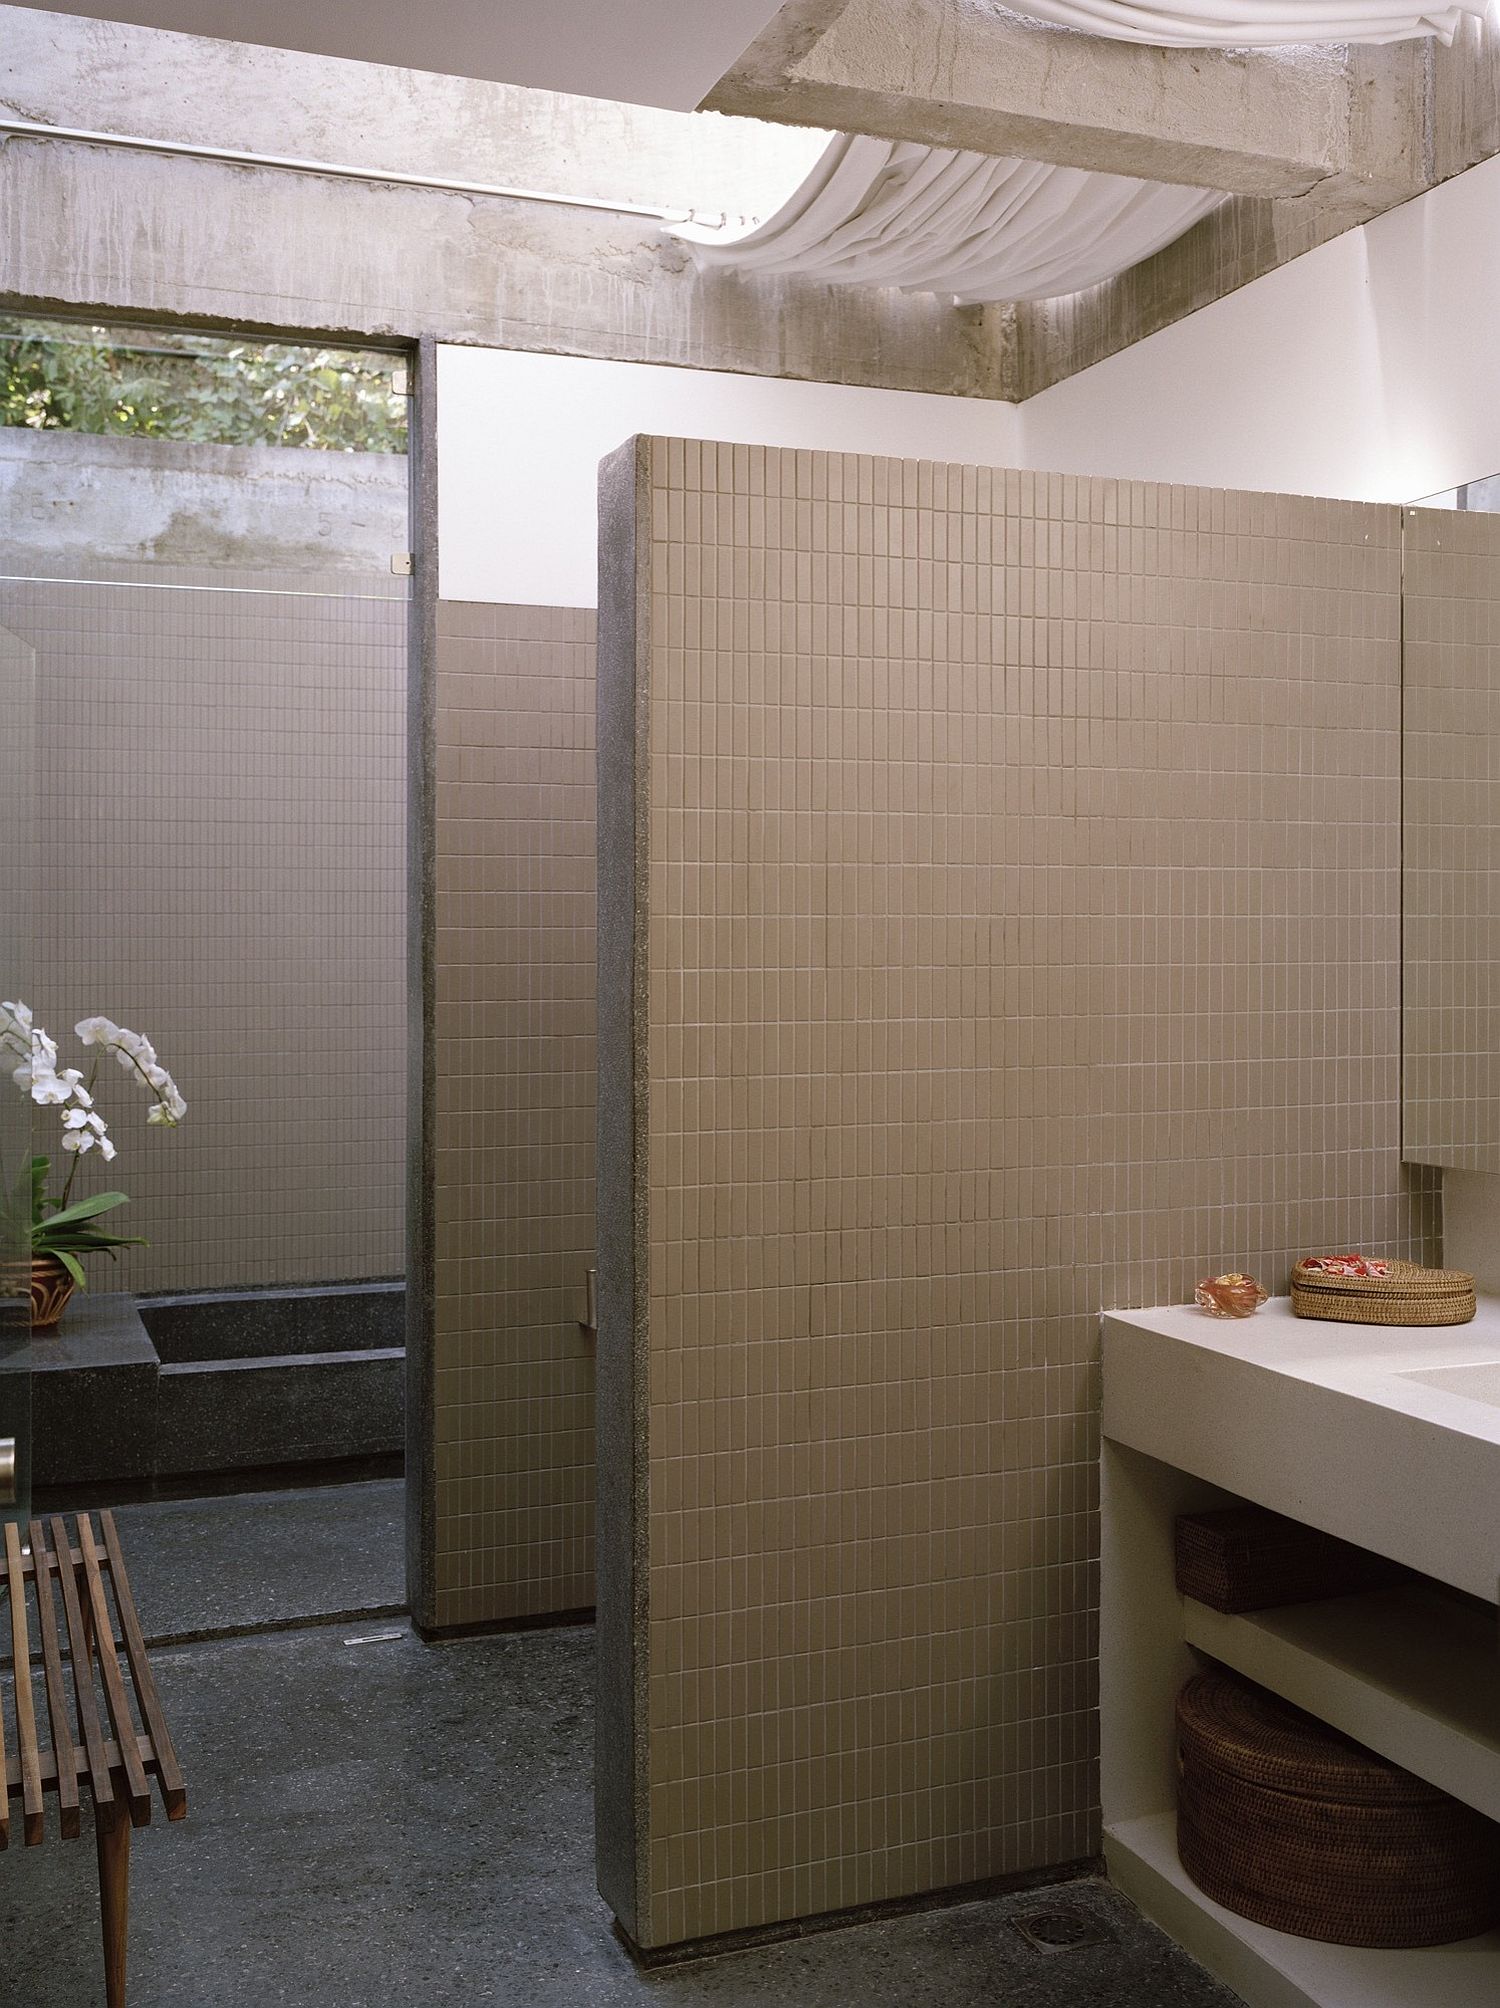 Concrete-and-tiles-bring-minimalism-to-the-modern-bathroom